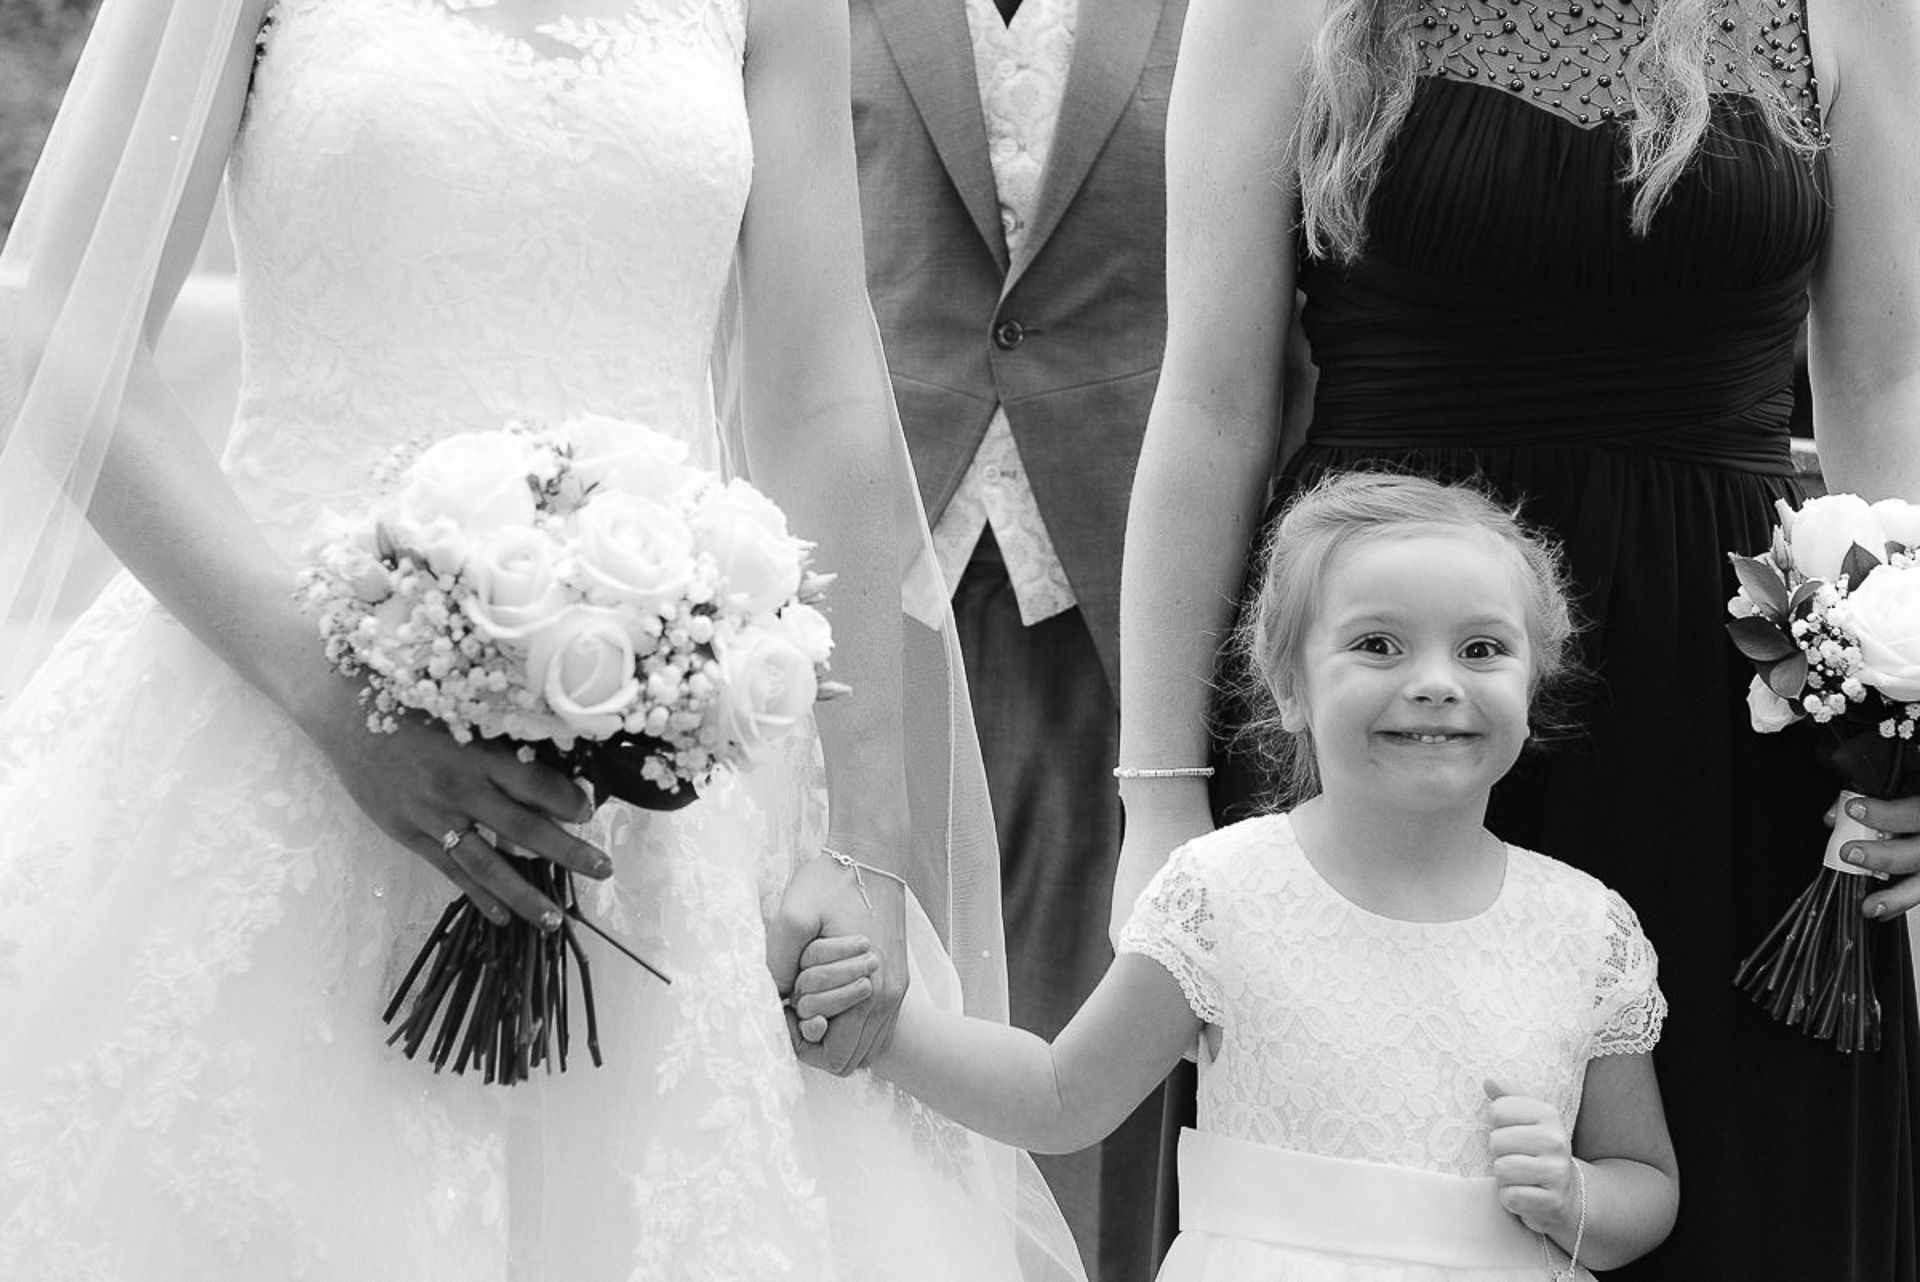 flowergirl walks with bride and bridesmaids, she smiles at the camera